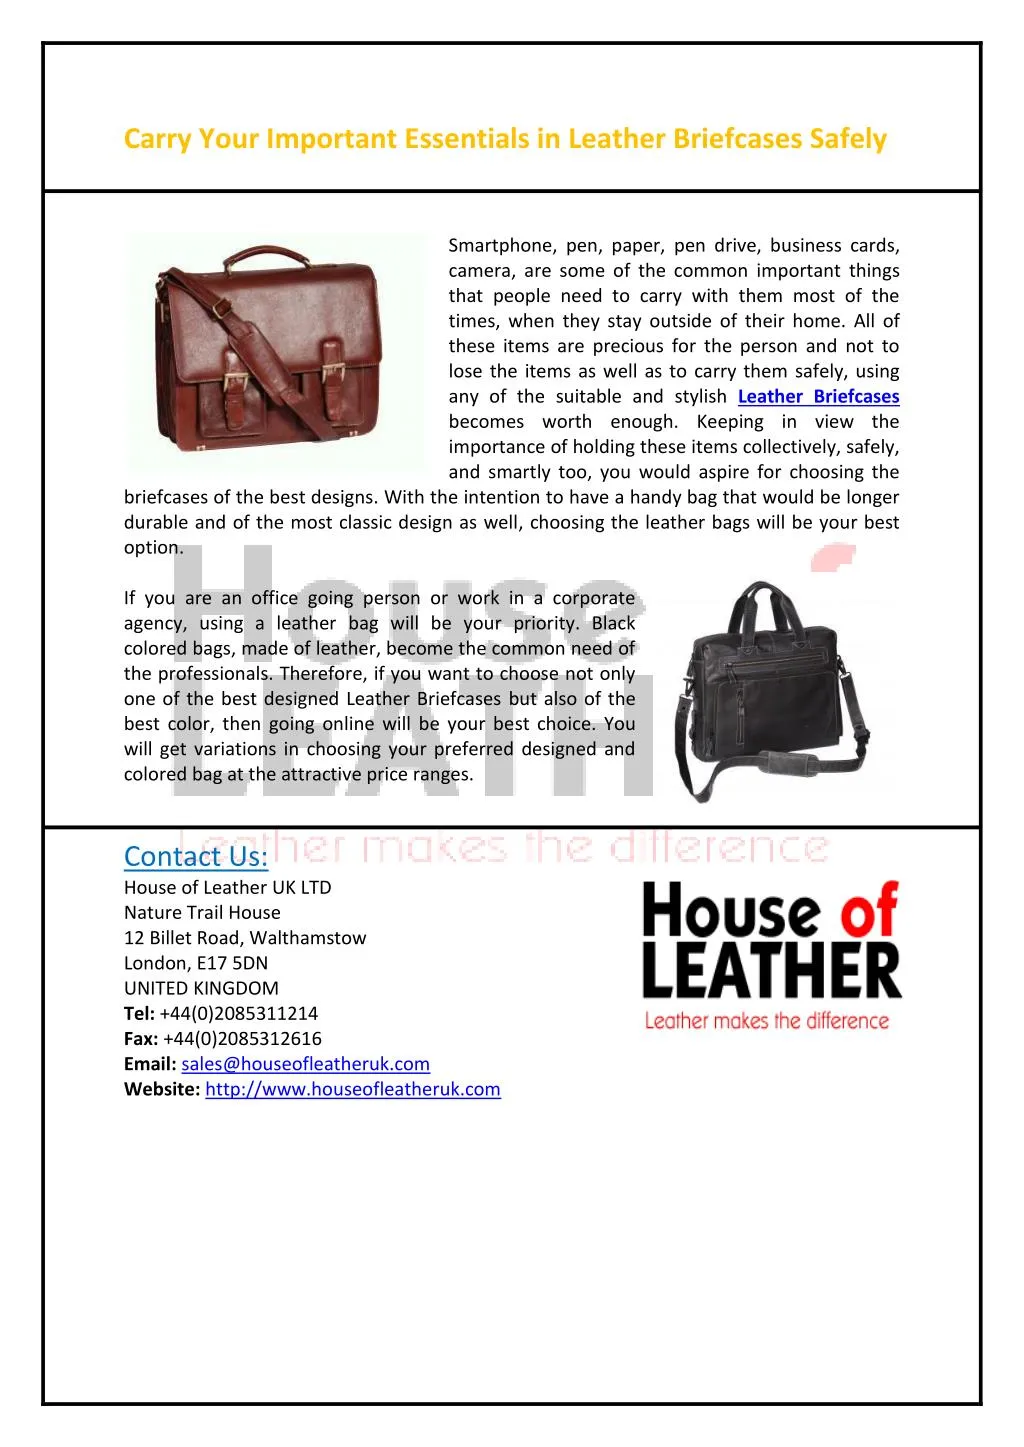 PPT - Carry Your Important Essentials in Leather Briefcases Safely ...